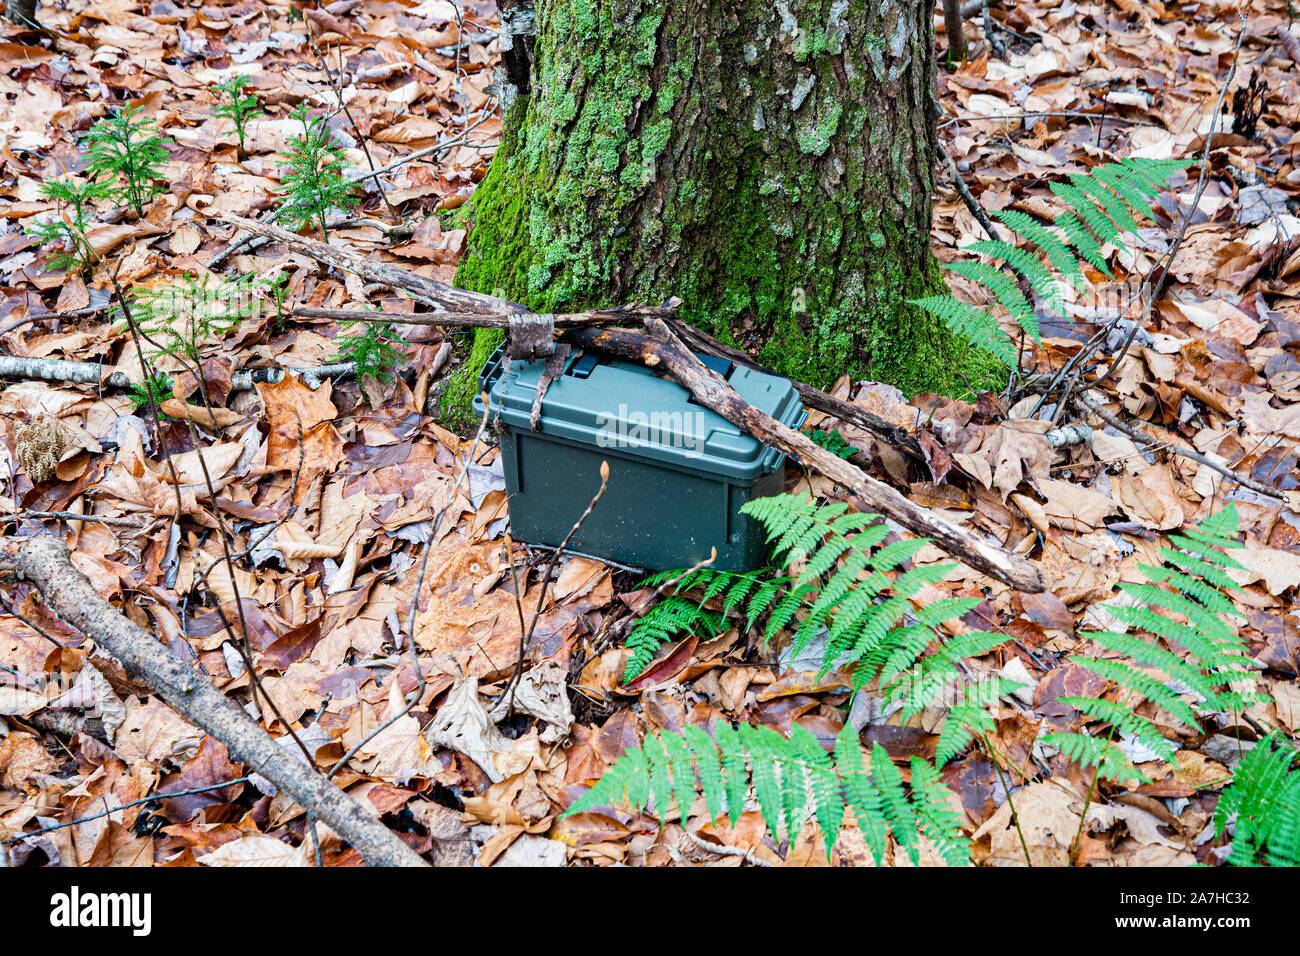 A green plastic ammo box hidden behind a tree in the Adirondack Mountains, NY USA wilderness as a geocache discovery. Stock Photo